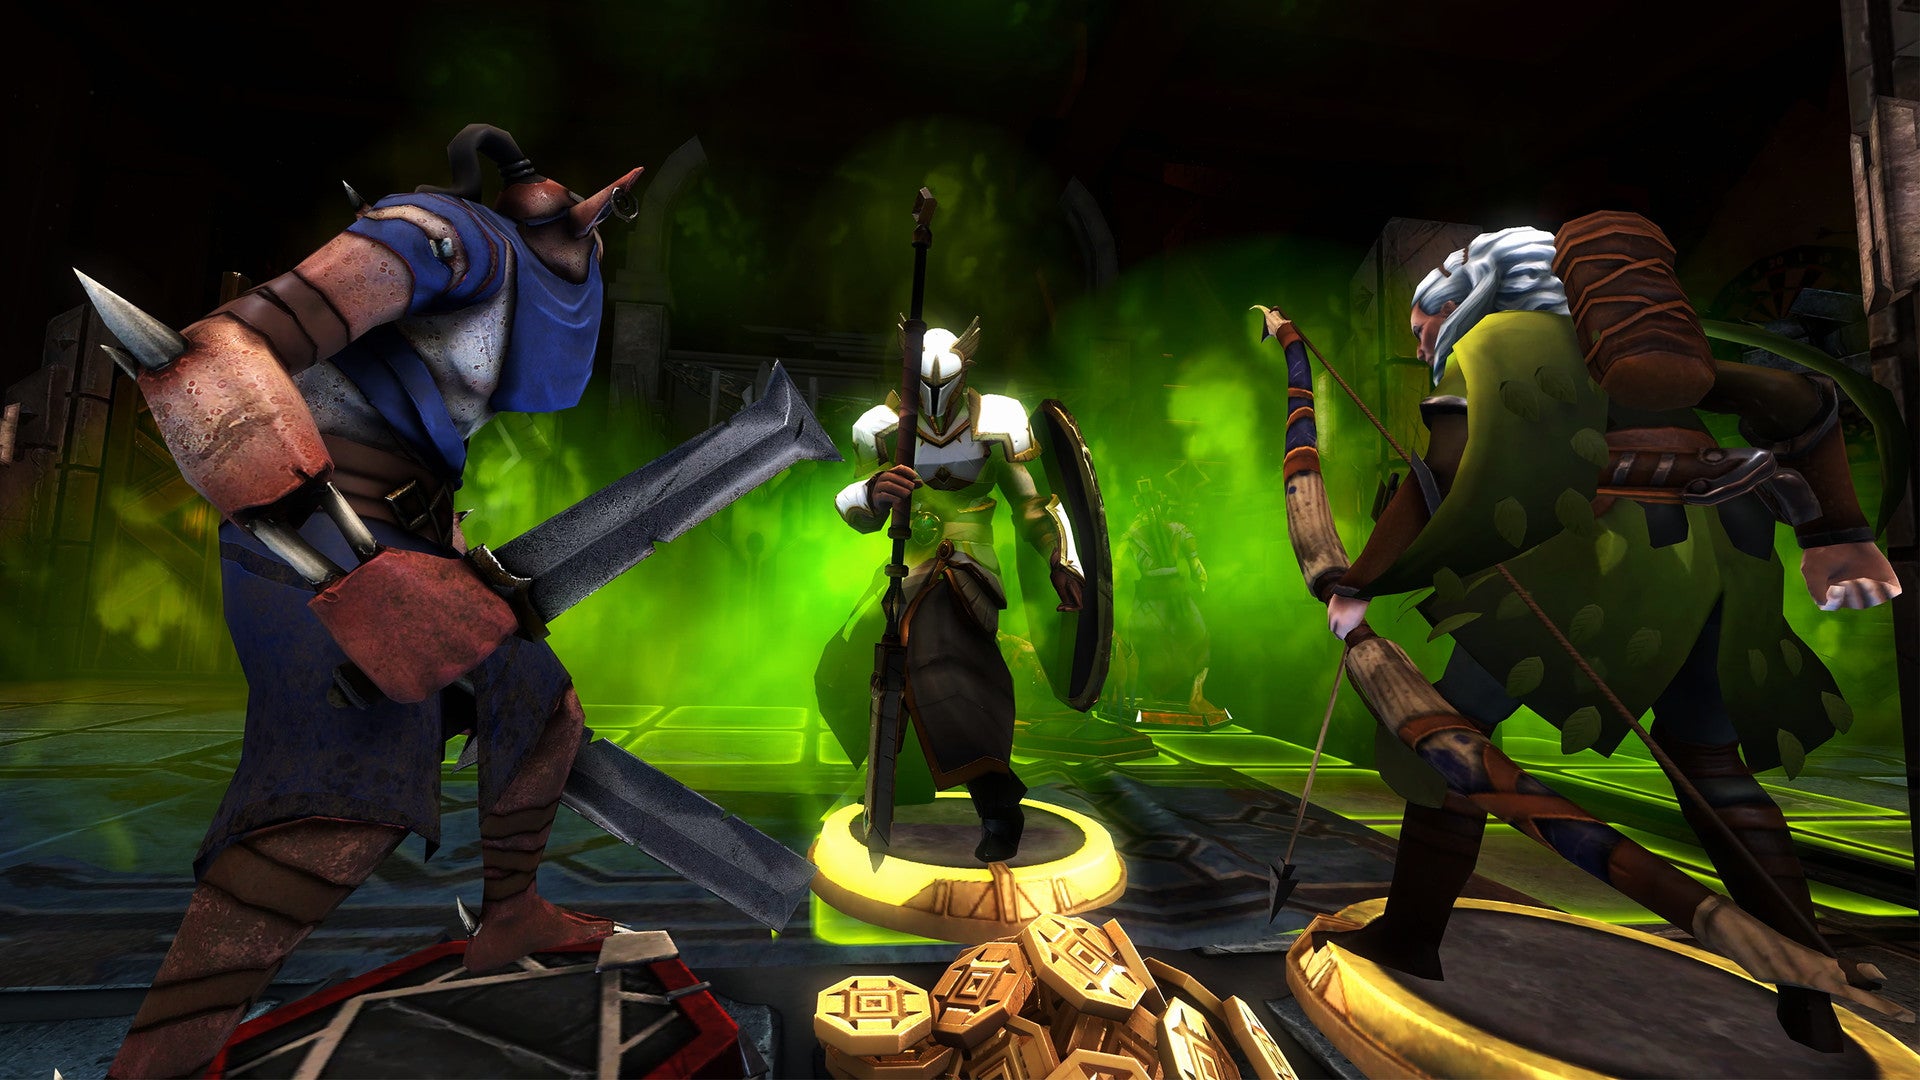 Three player character miniature figures in Demeo are gathered around a pile of gold coins